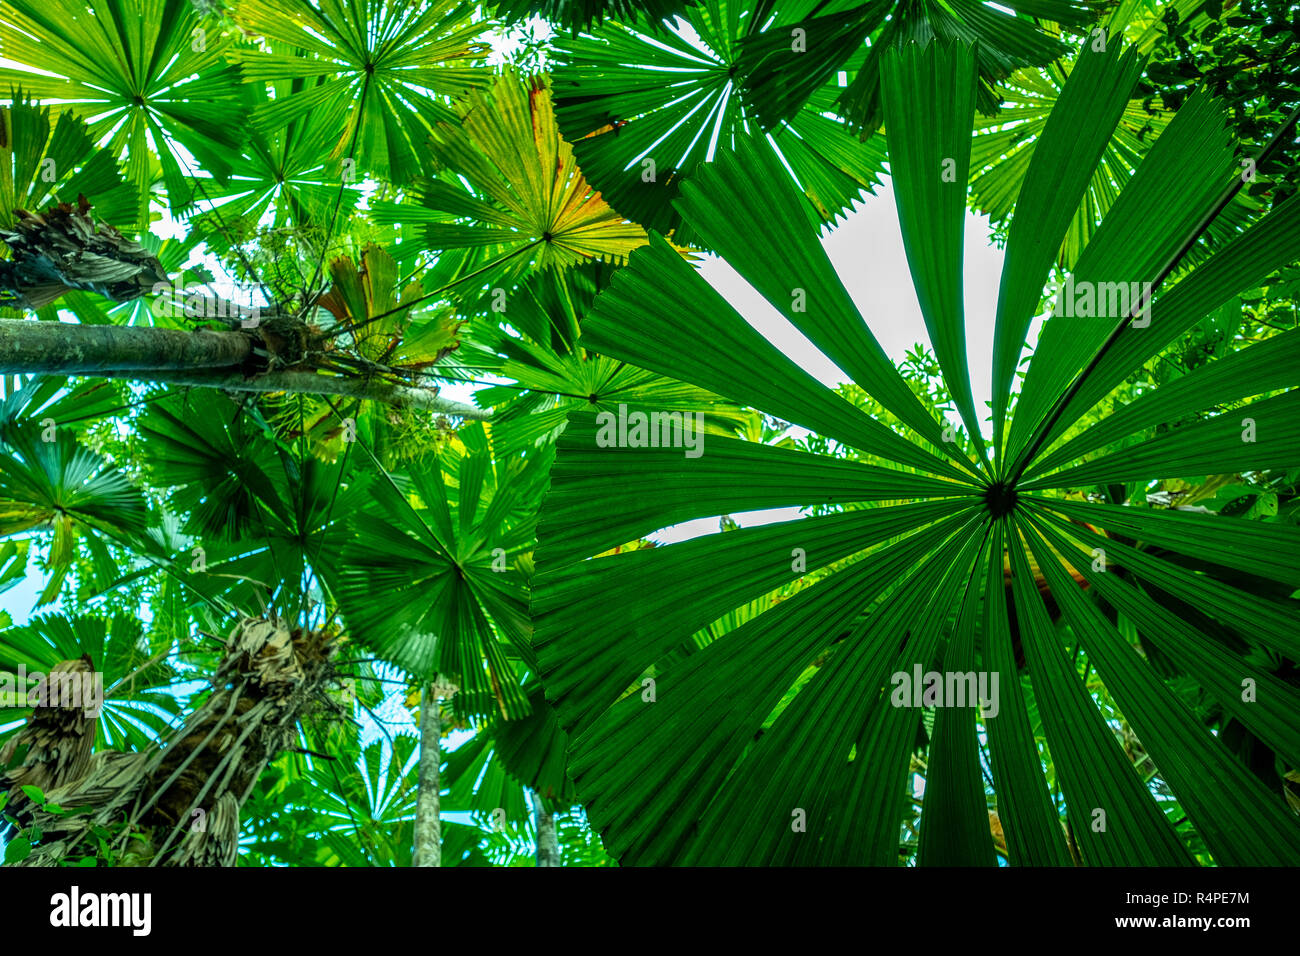 View upward through dense green licuala palm forest in the Daintree national park, Queensland, Australia Stock Photo